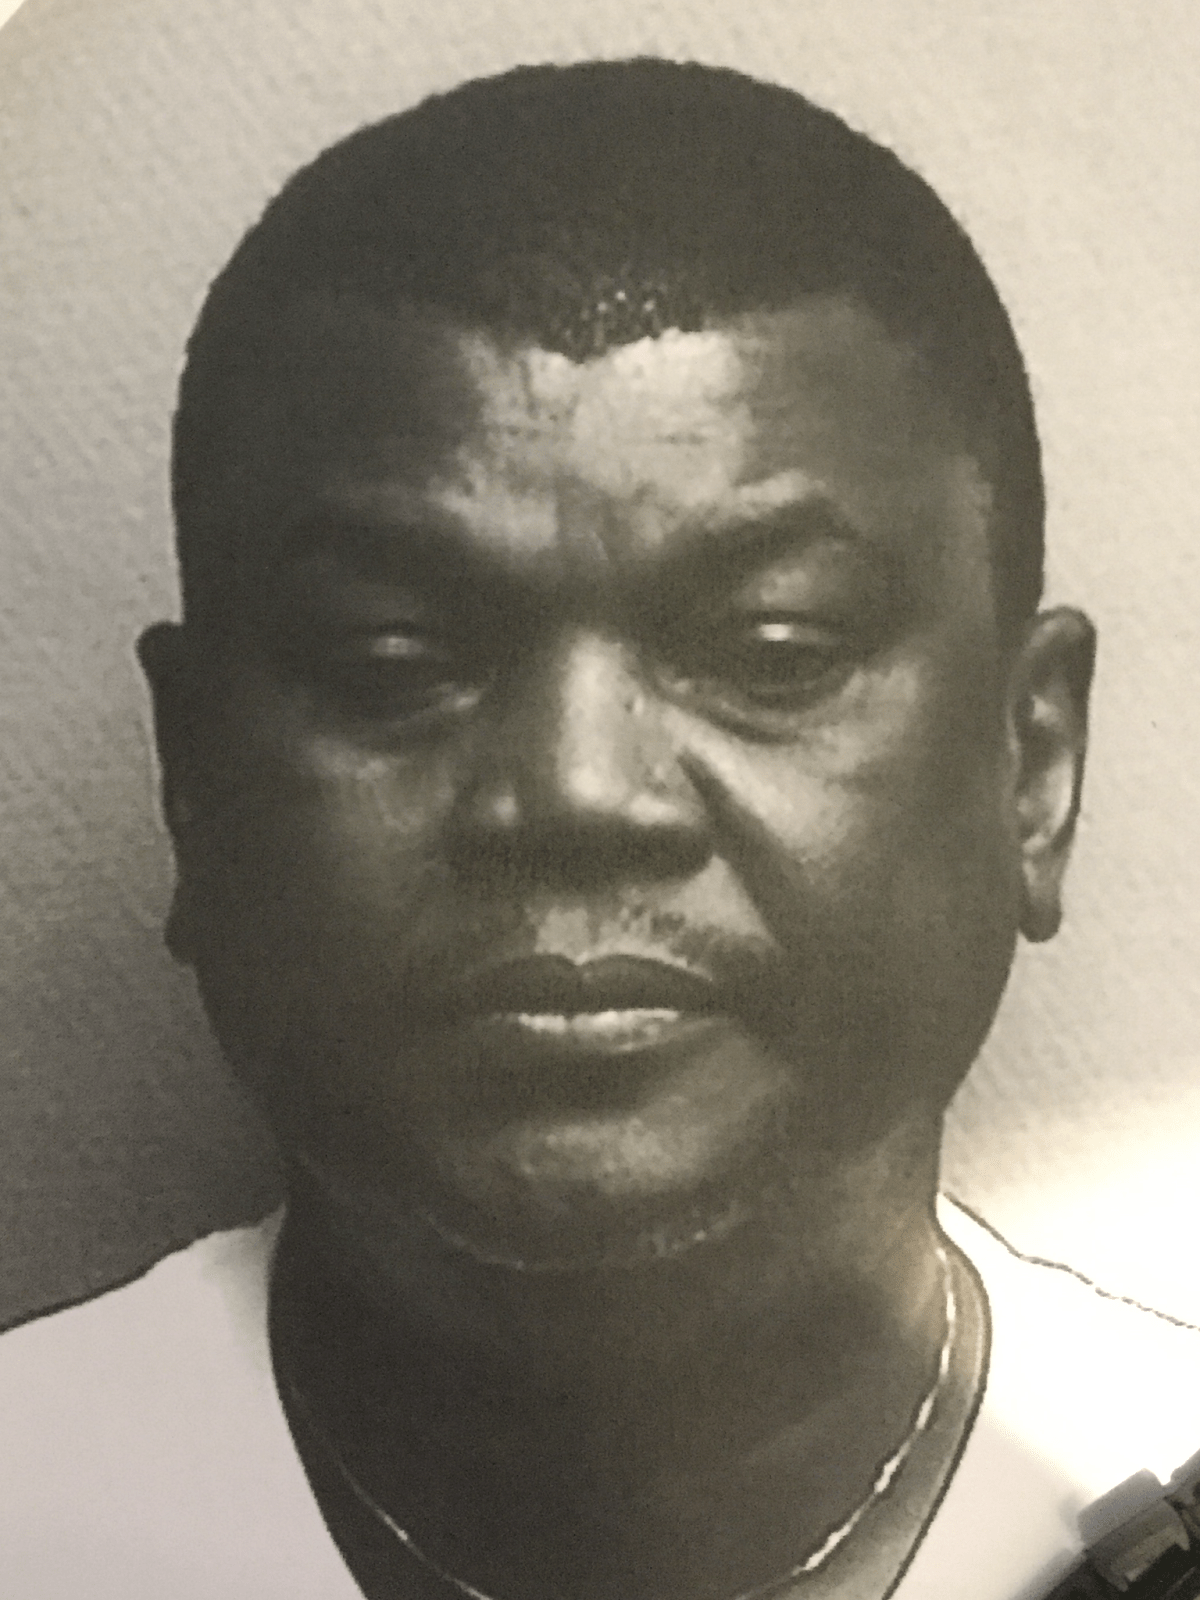 A mug shot from documents submitted as part of the arrest request for Adesanya Prince, who walked into Canada from the U.S. at Roxham Road.